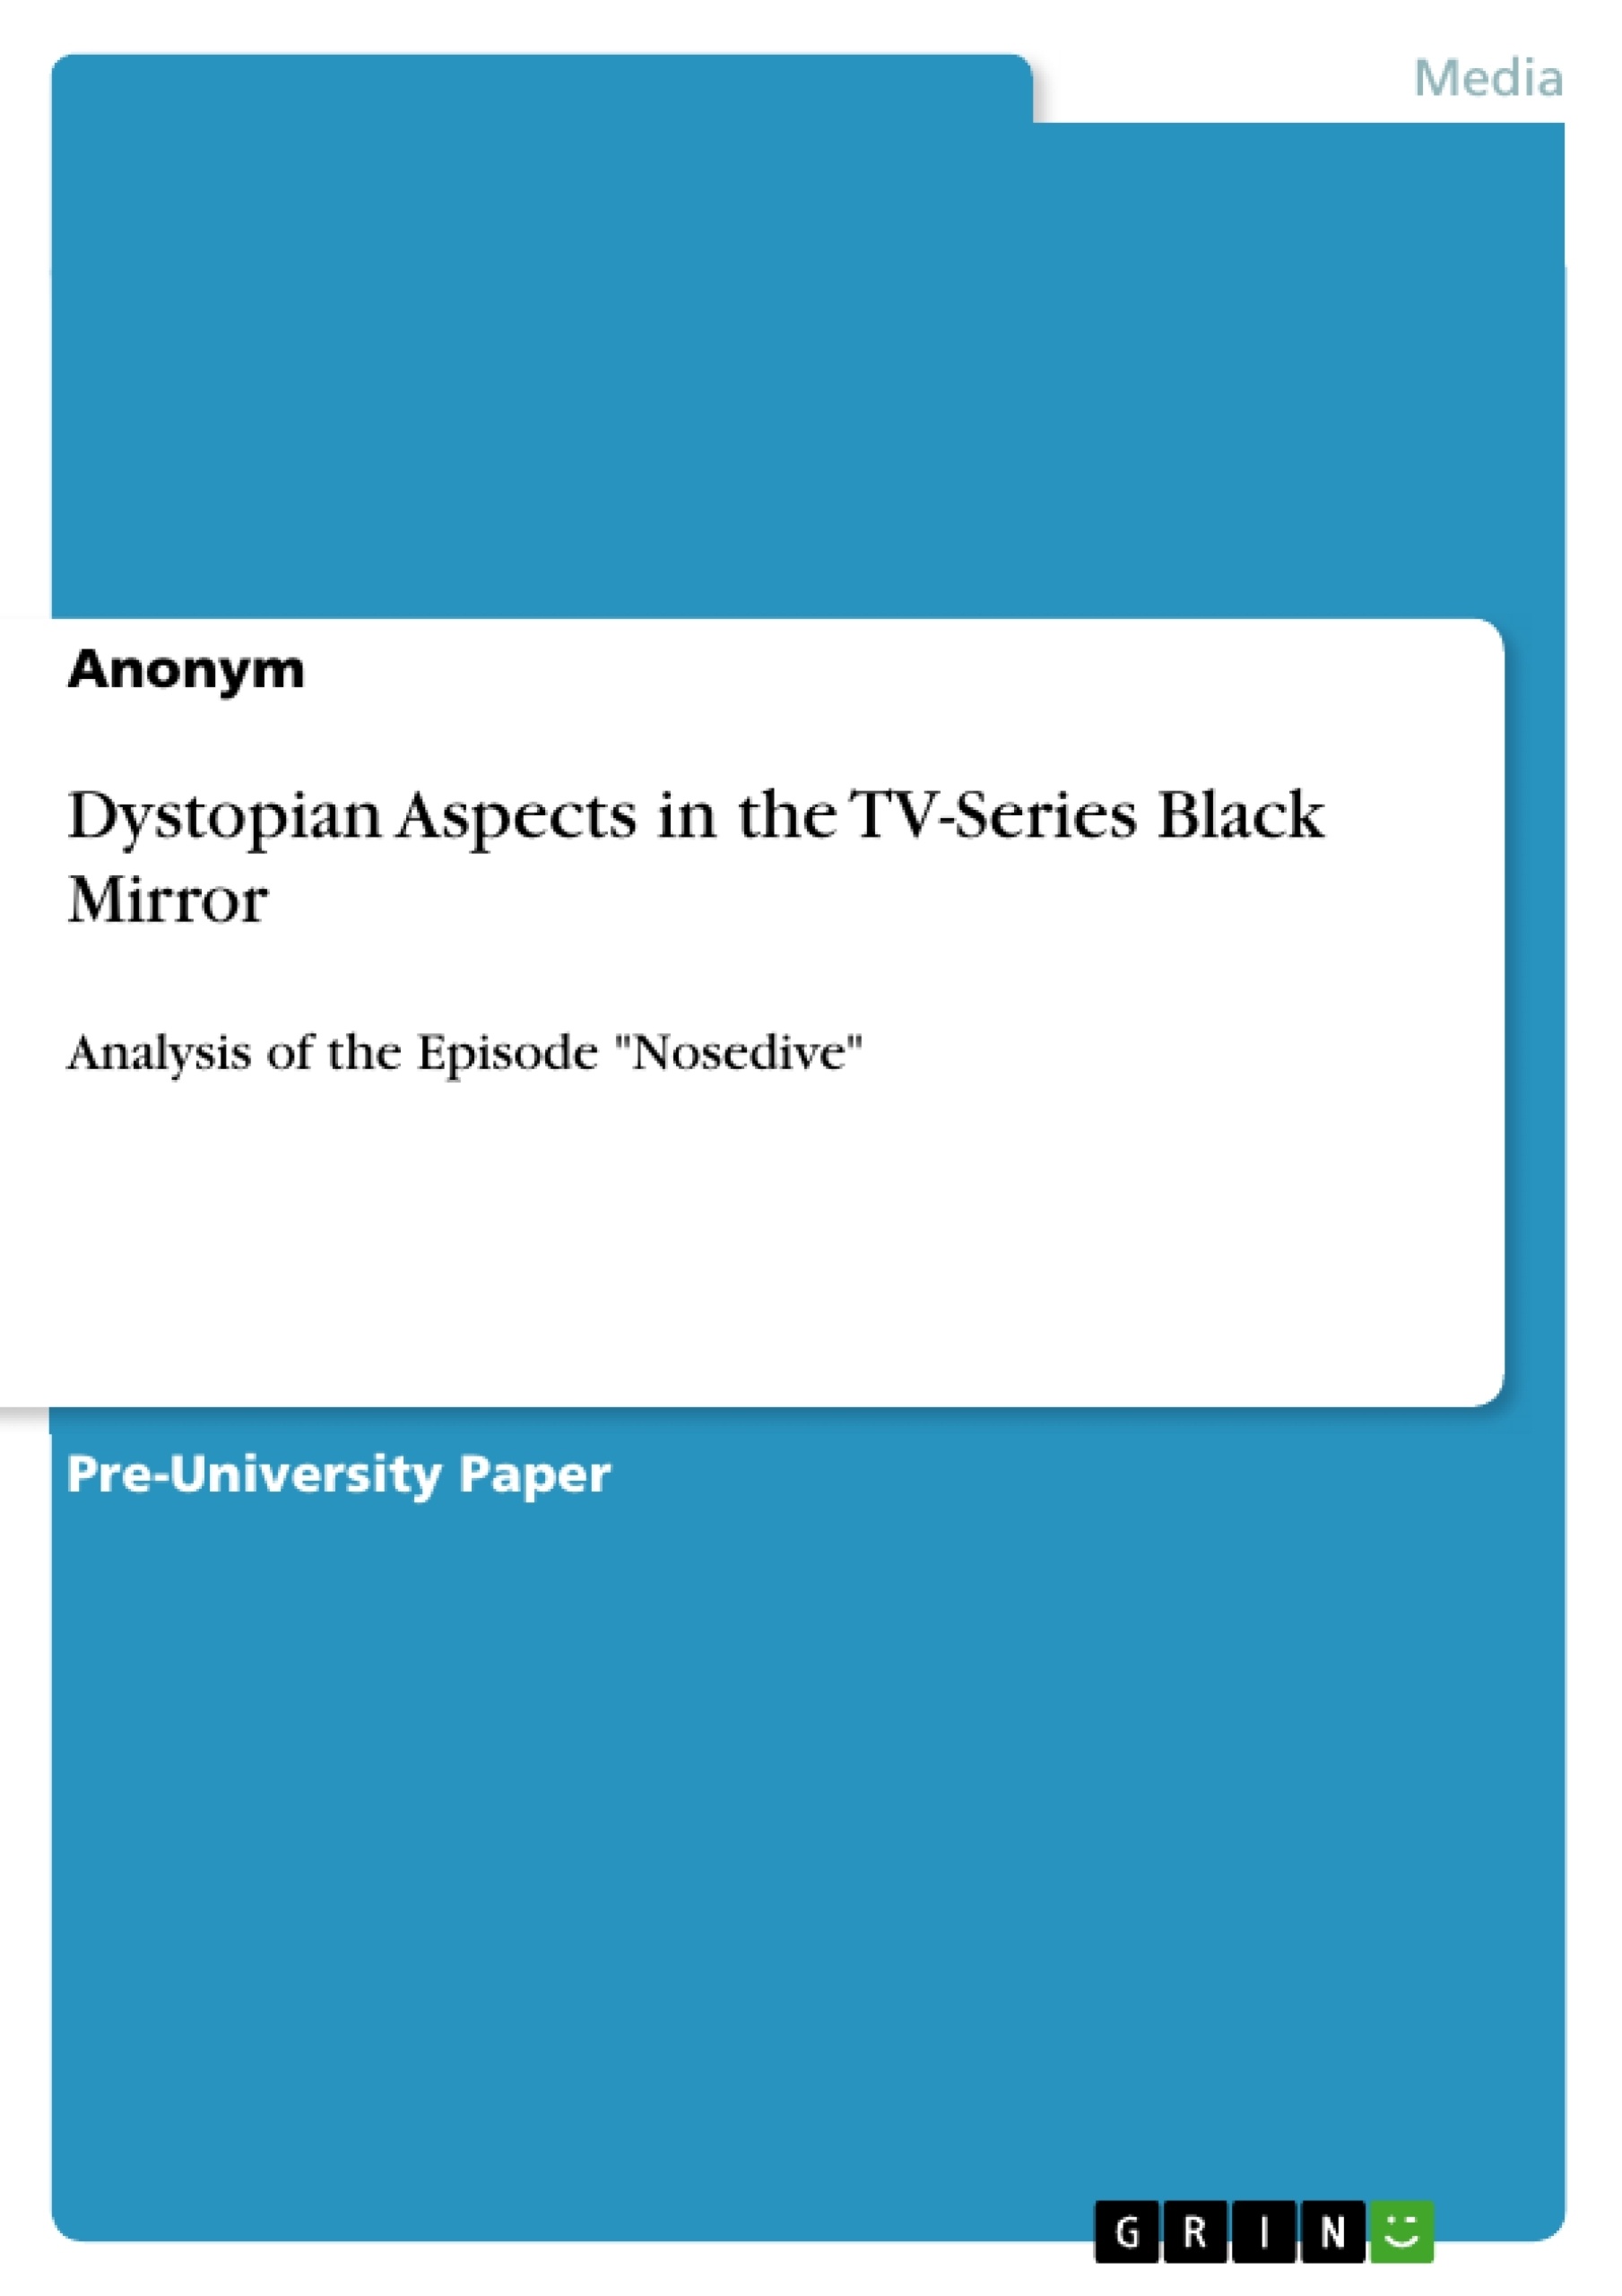 Title: Dystopian Aspects in the TV-Series Black Mirror